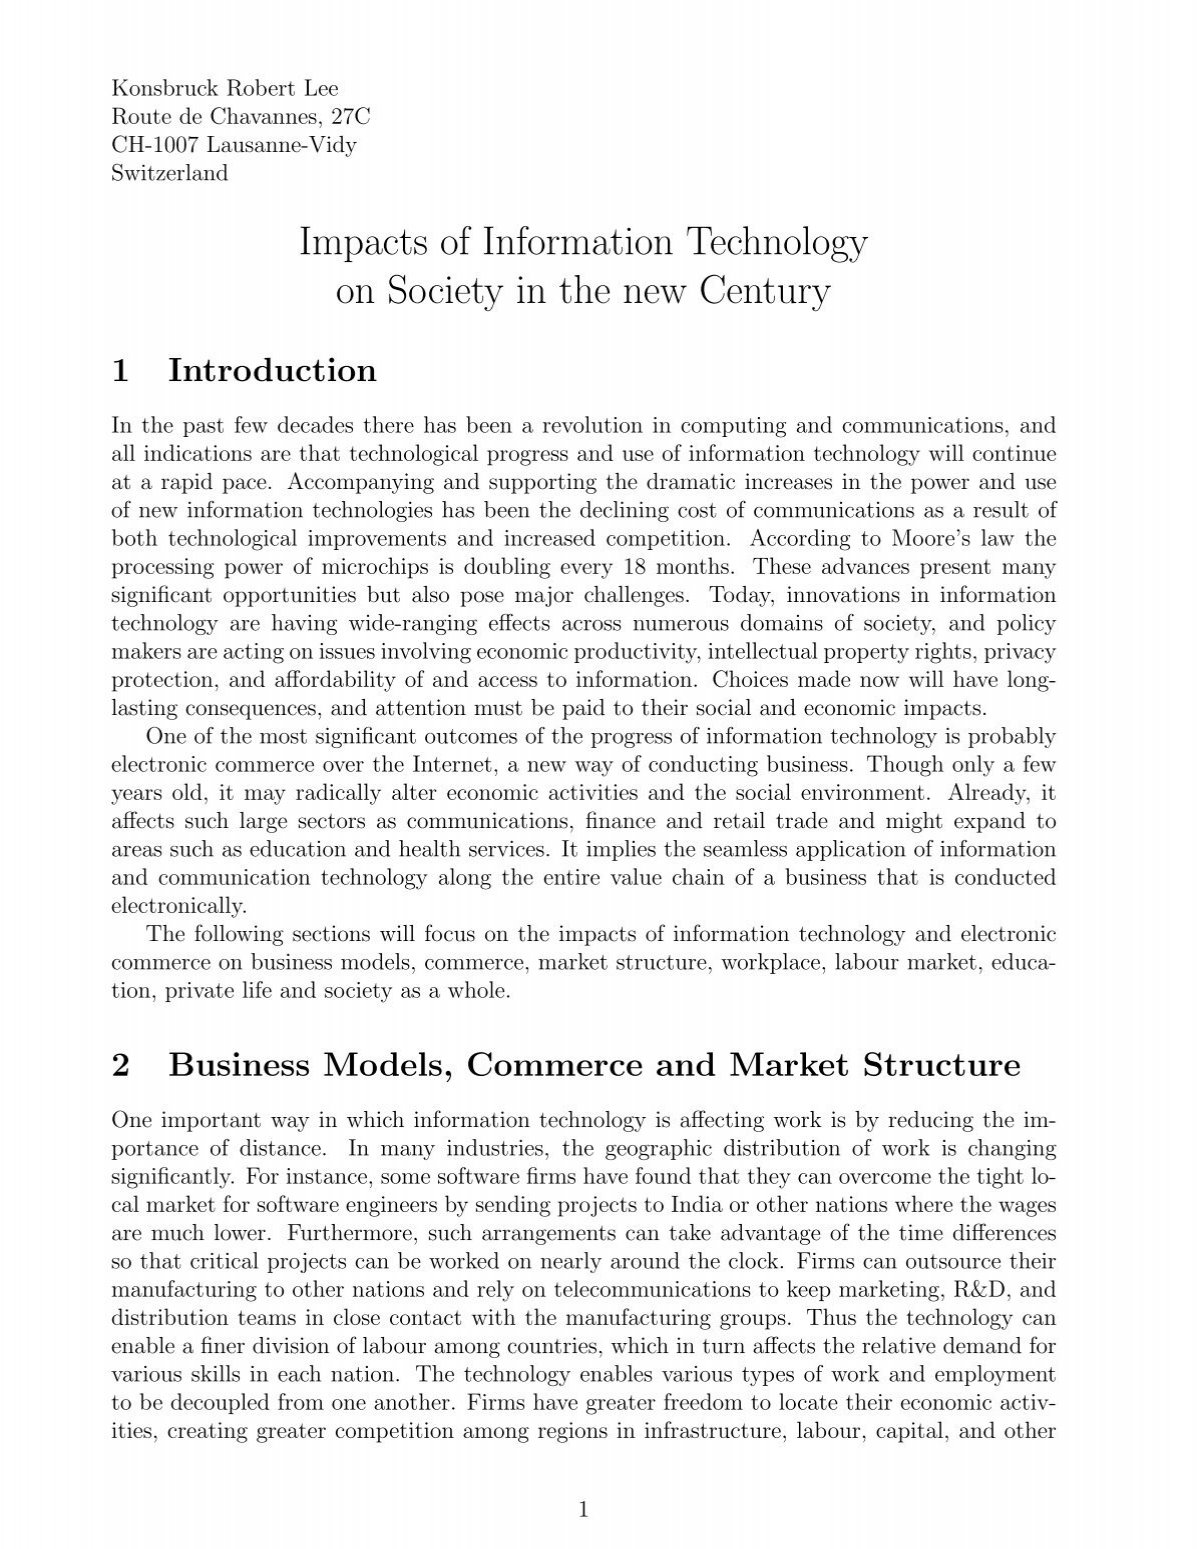 thesis on impact of information technology